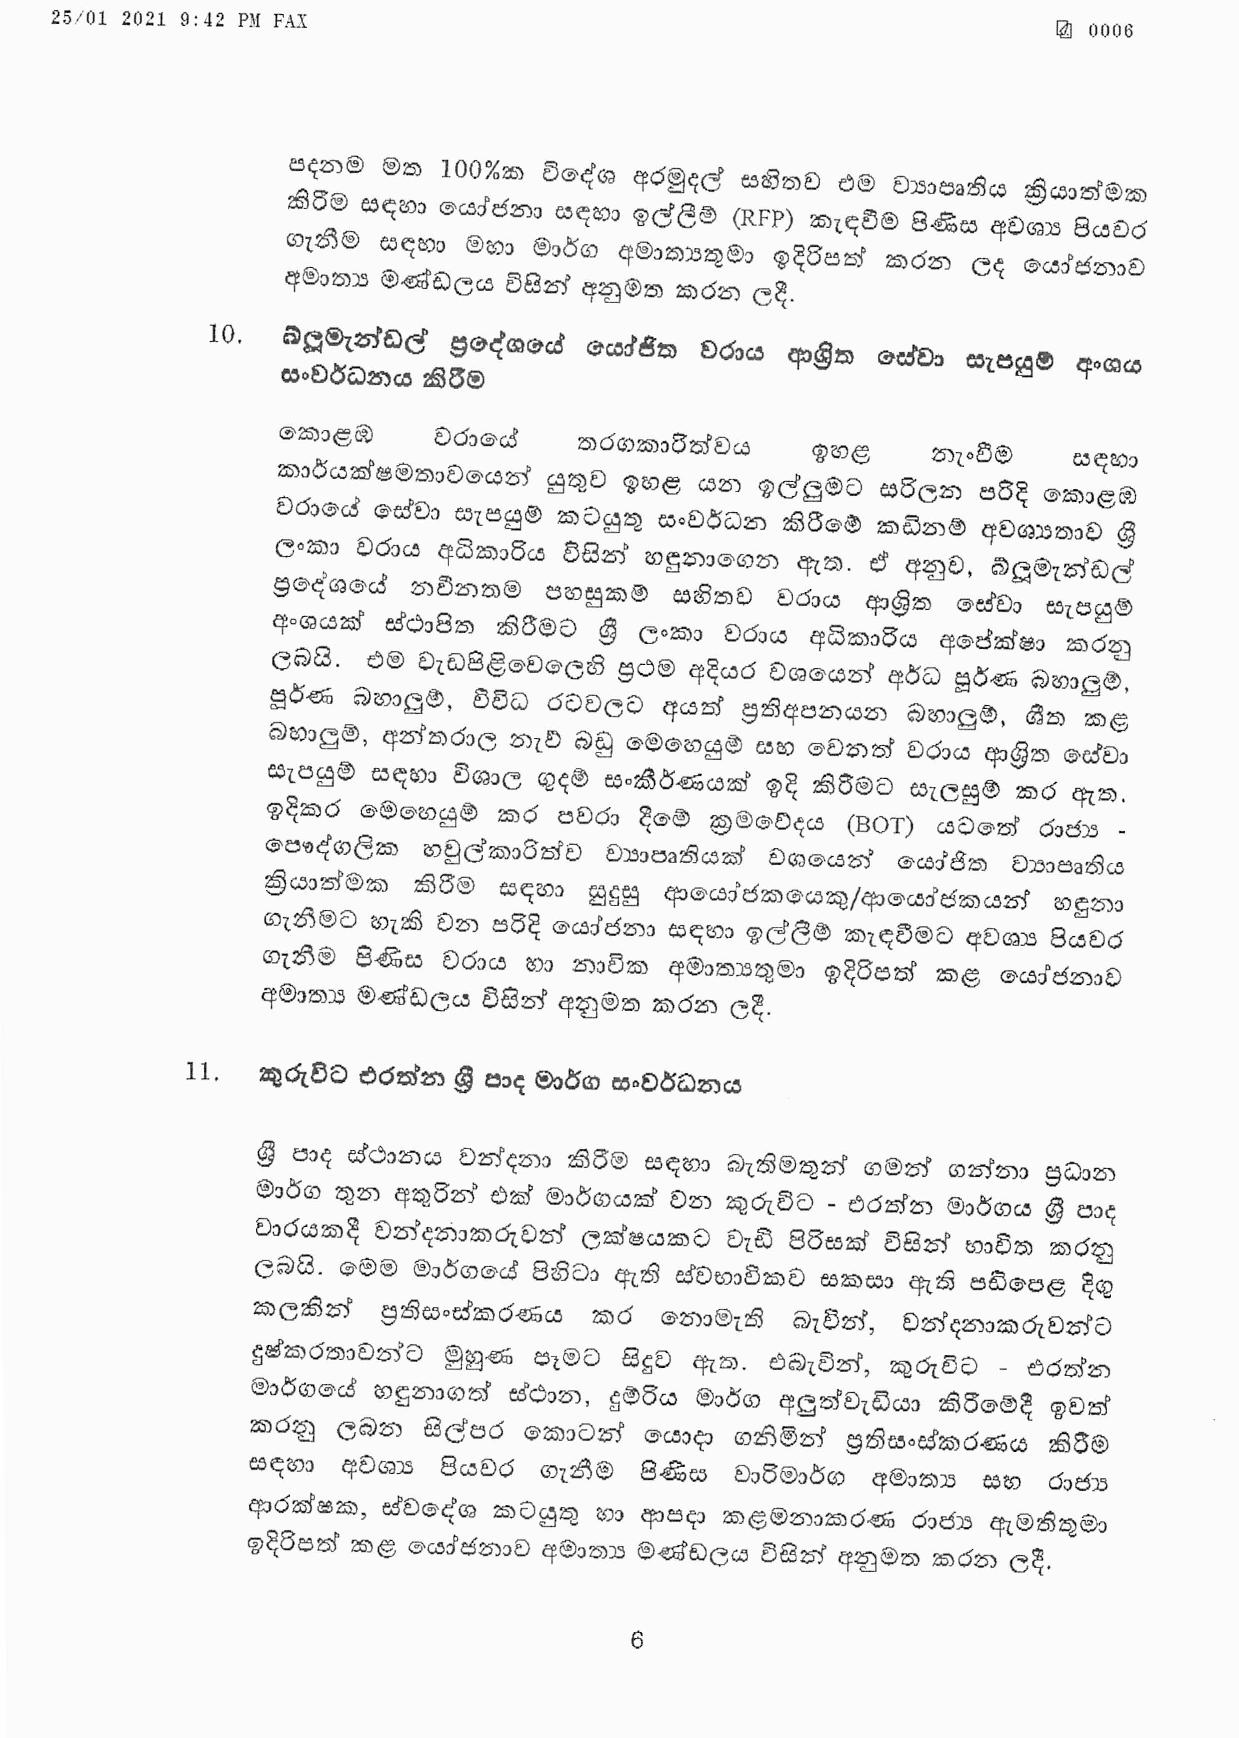 Cabinet Decision on 25.01.2021 page 006